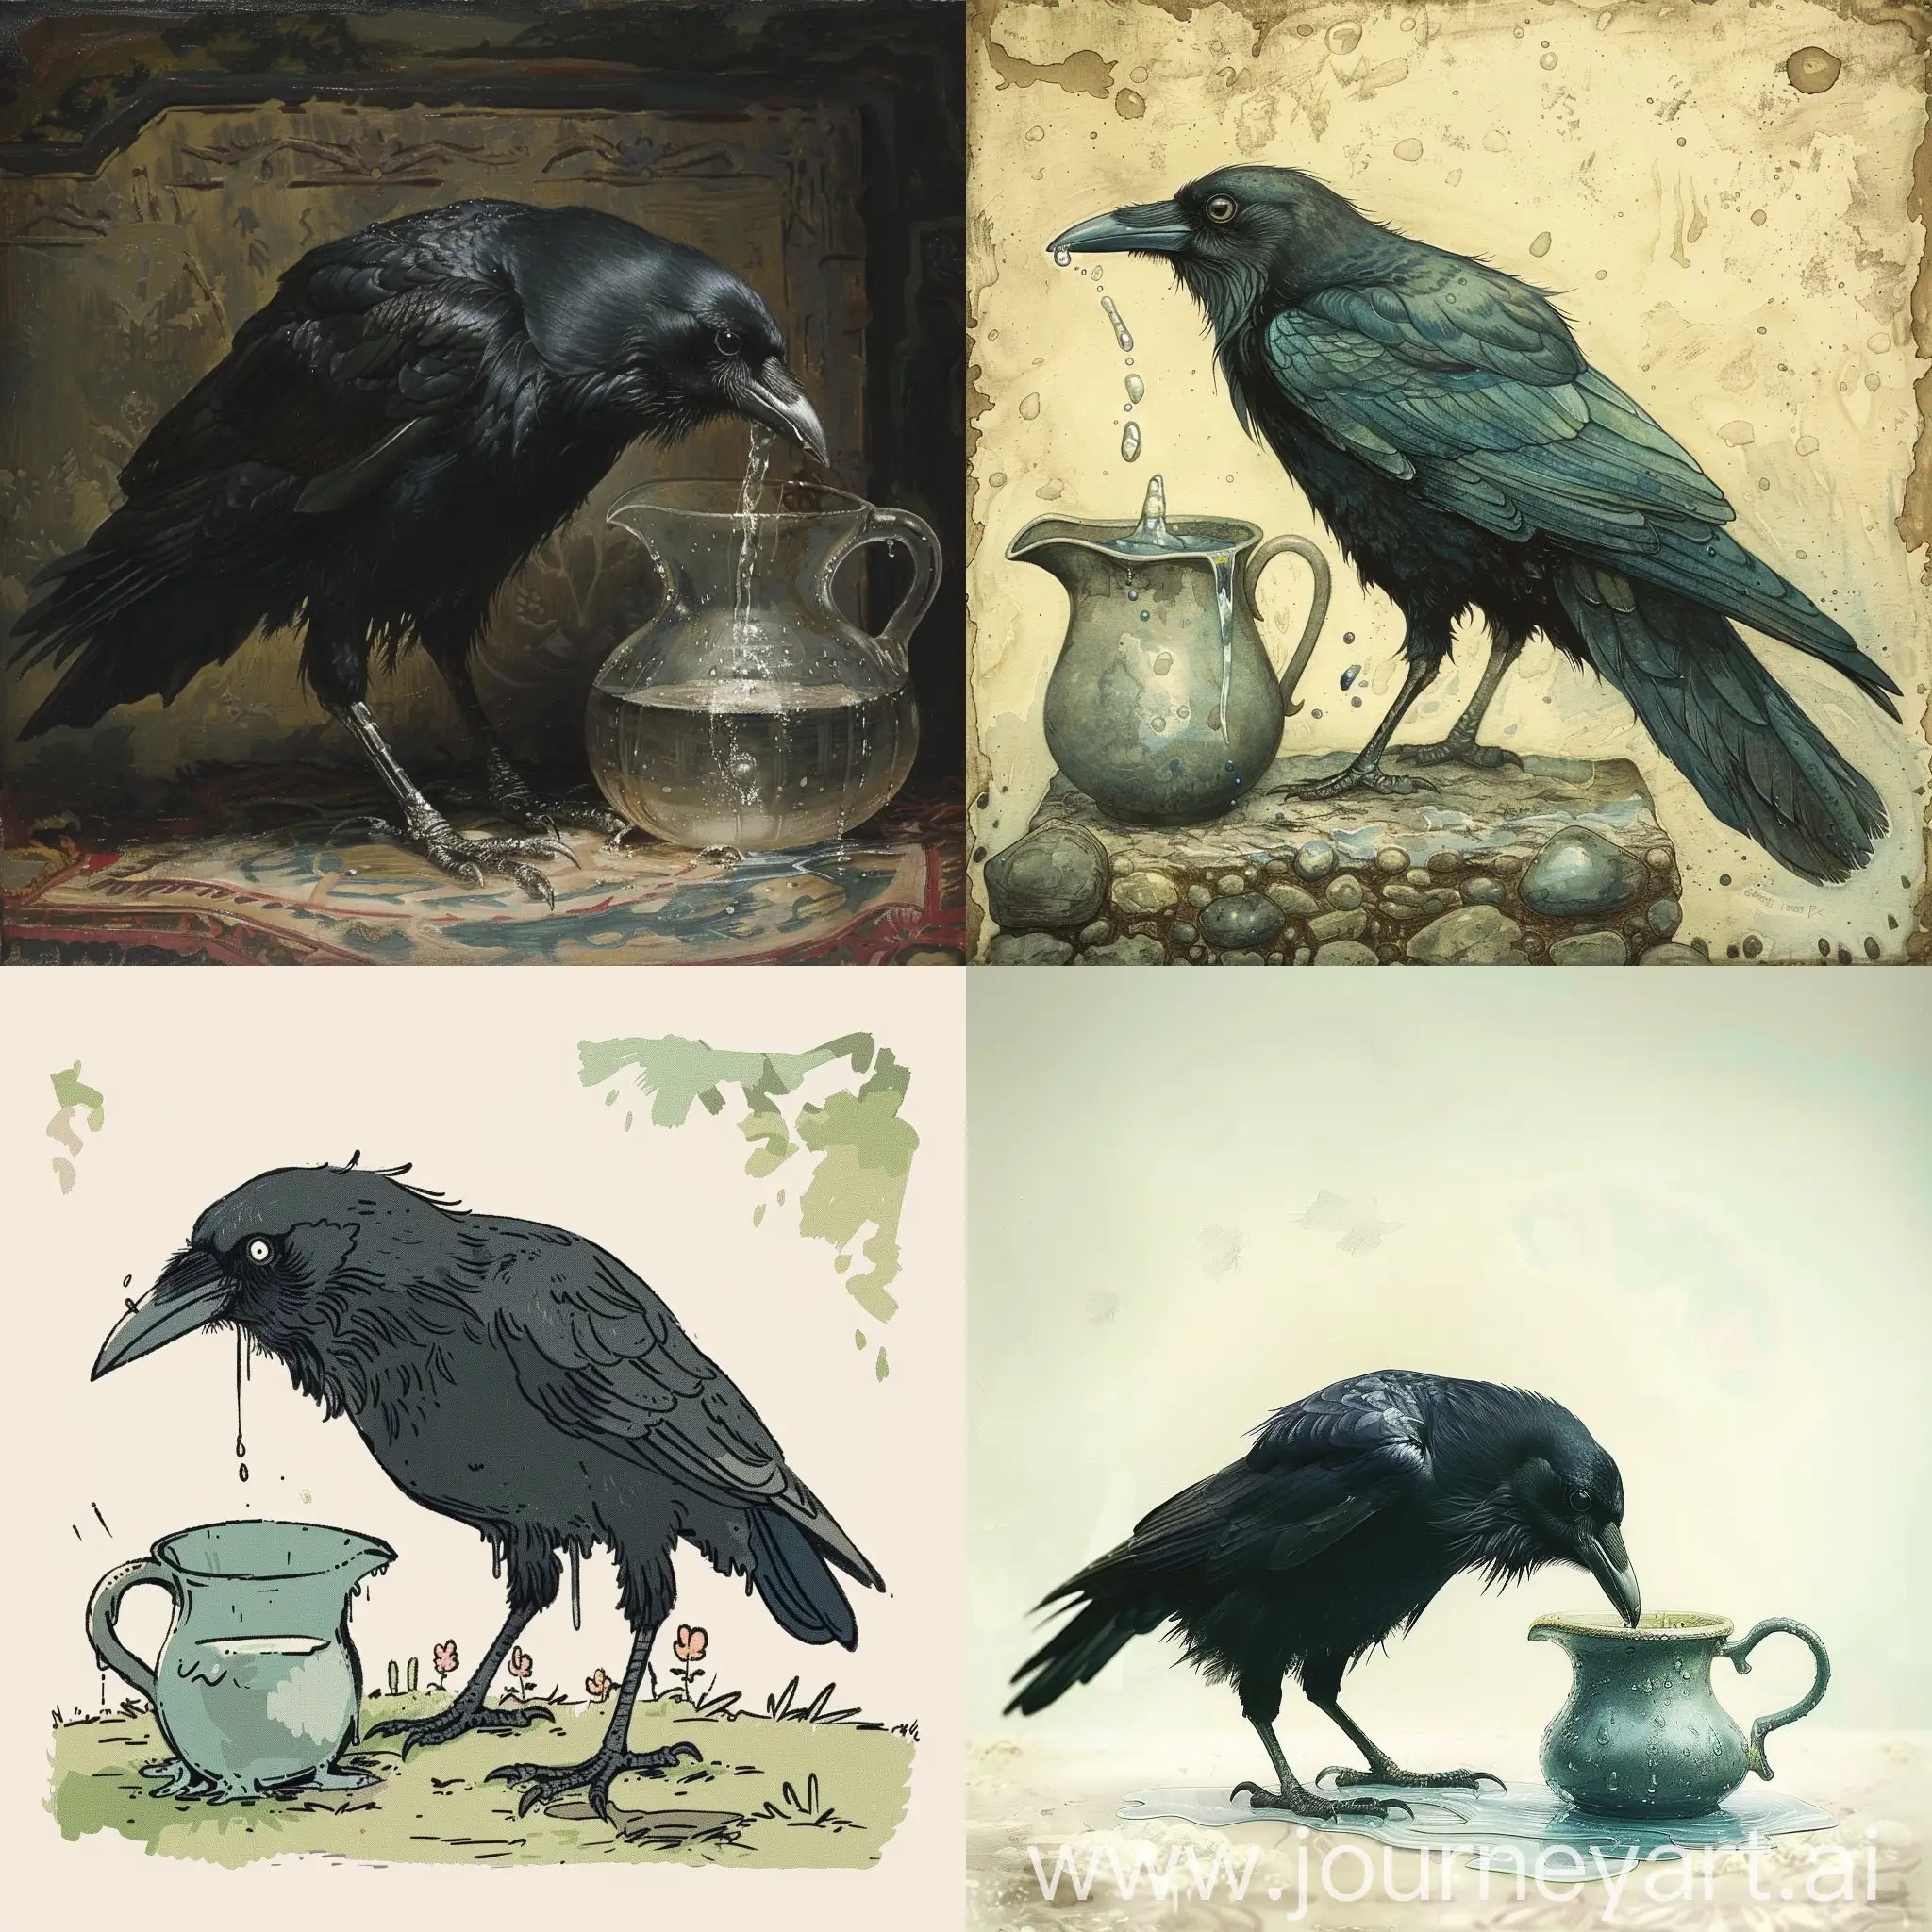 Thirsty-Crow-Finding-Water-in-Pitcher